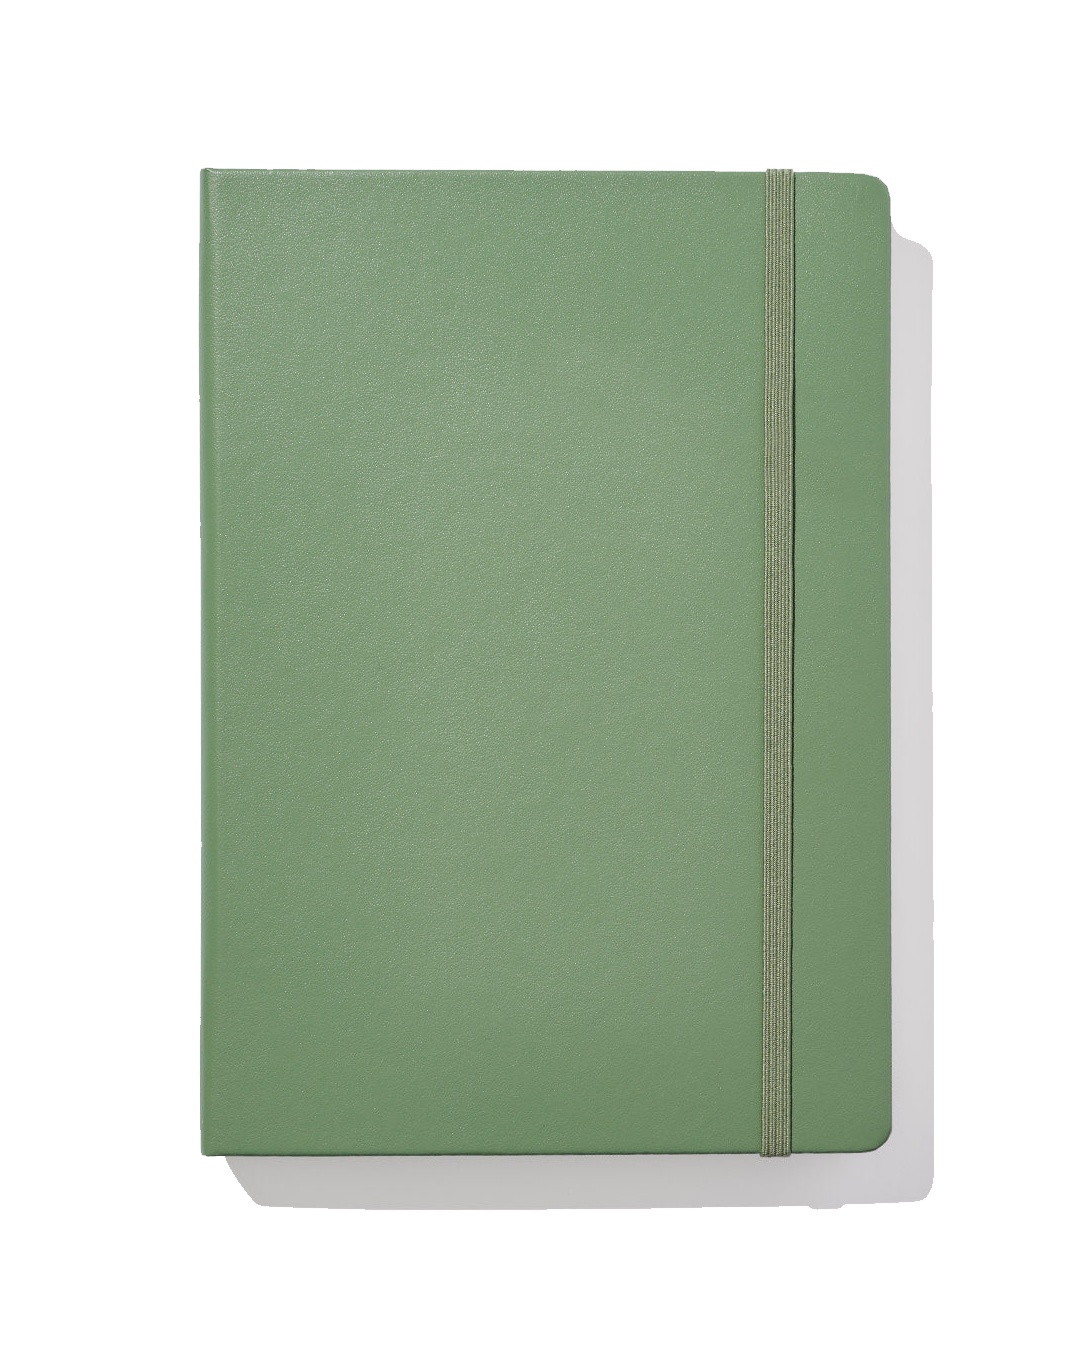 Notebook_leather_a5-11.png